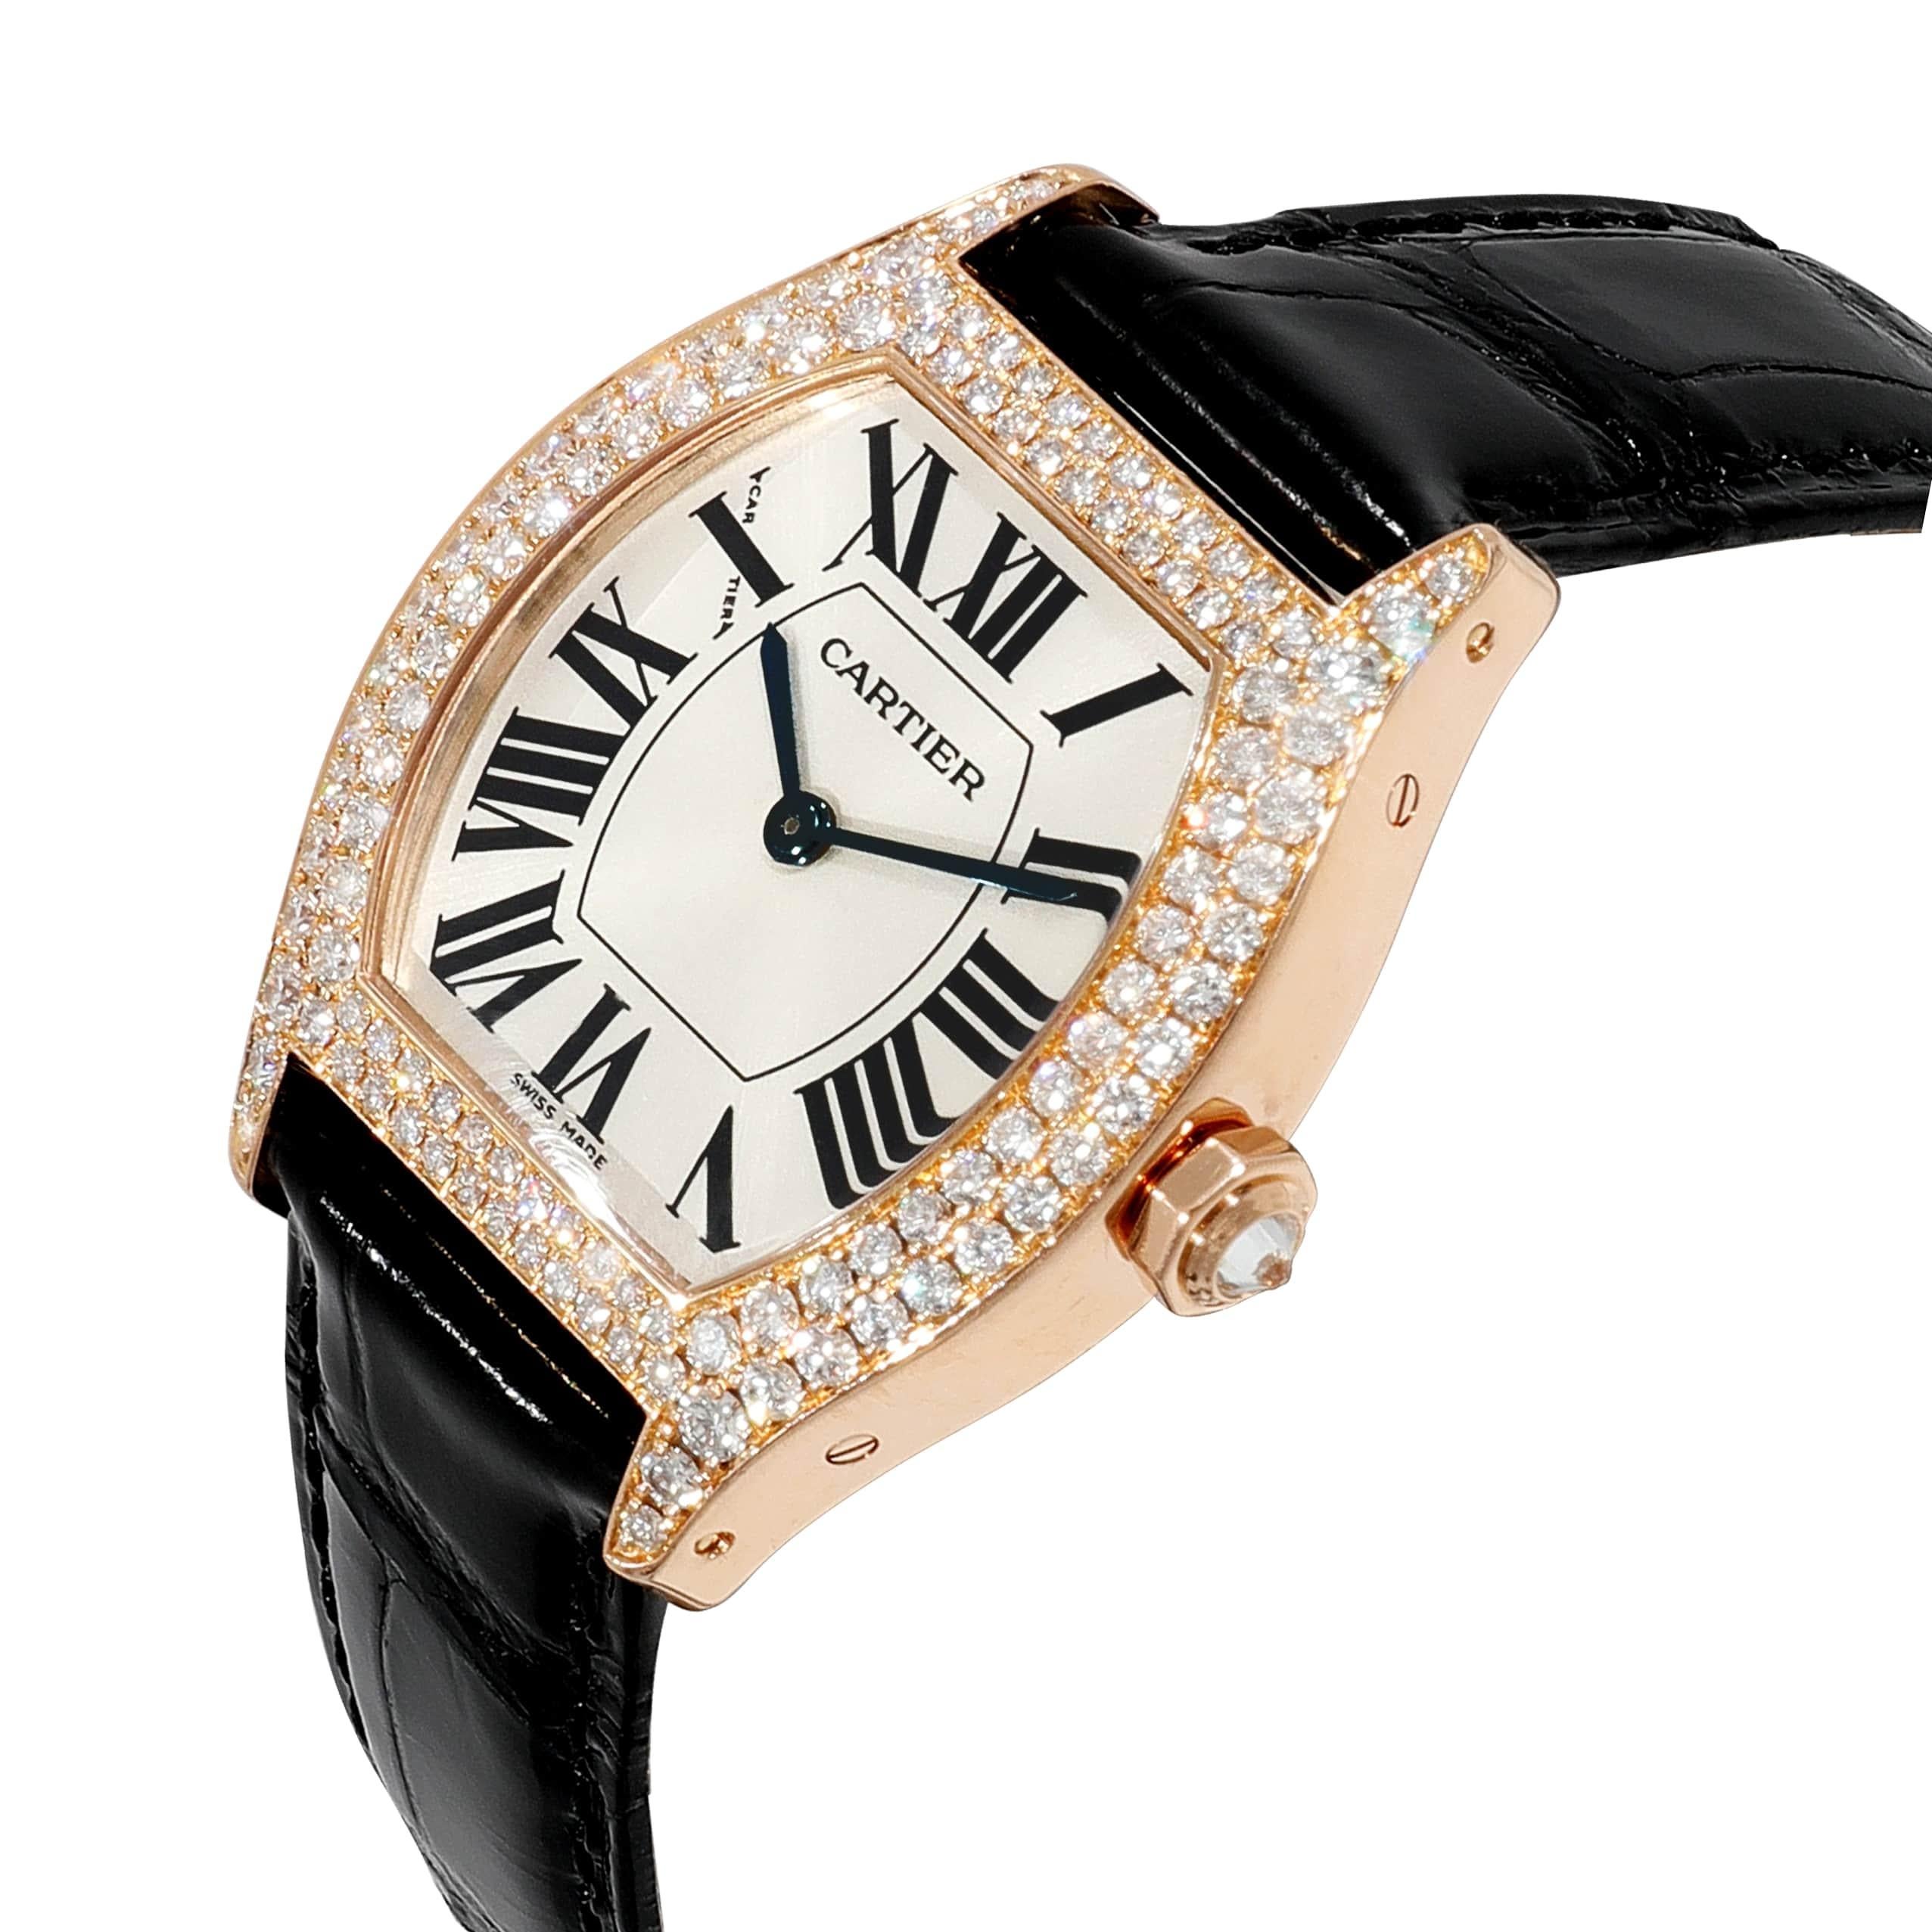 Cartier Tortue WA503751 Women's Watch in 18 Karat Rose Gold In Excellent Condition For Sale In New York, NY